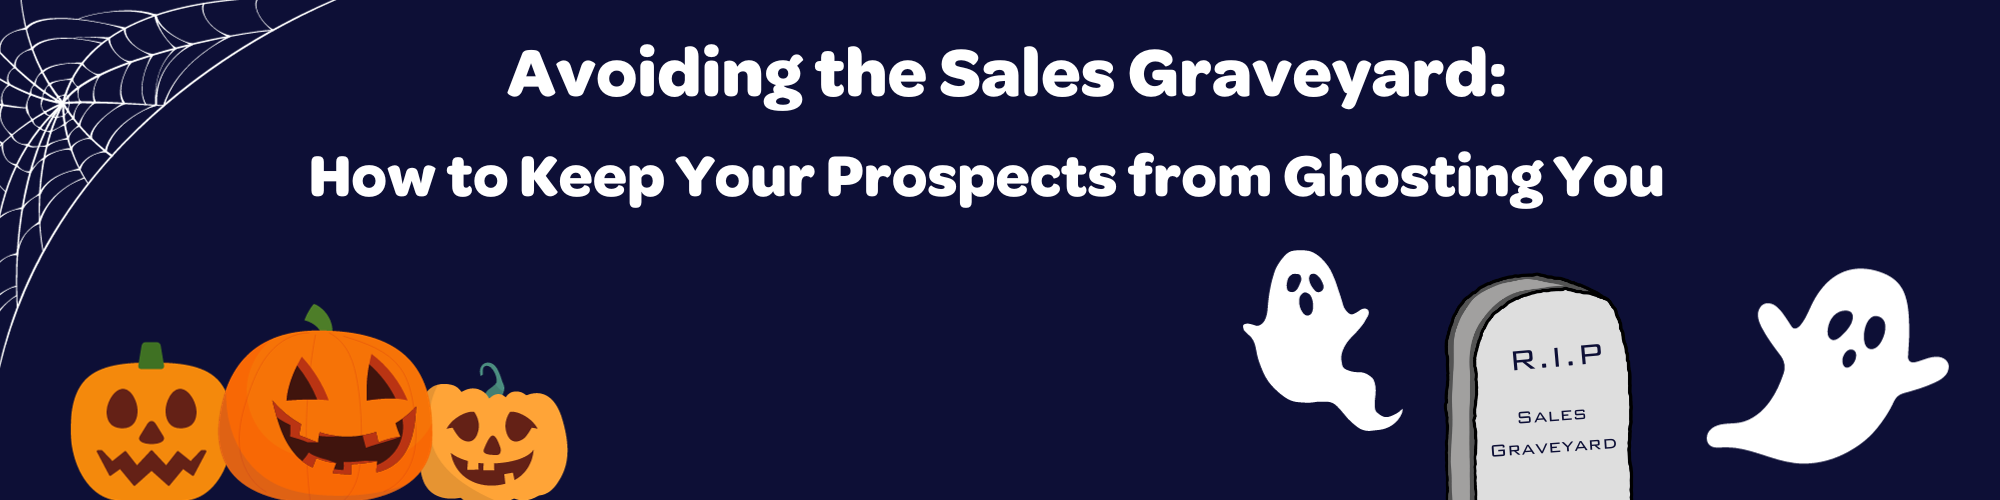 Avoiding the Sales Graveyard: How to Keep Your Prospects from Ghosting You